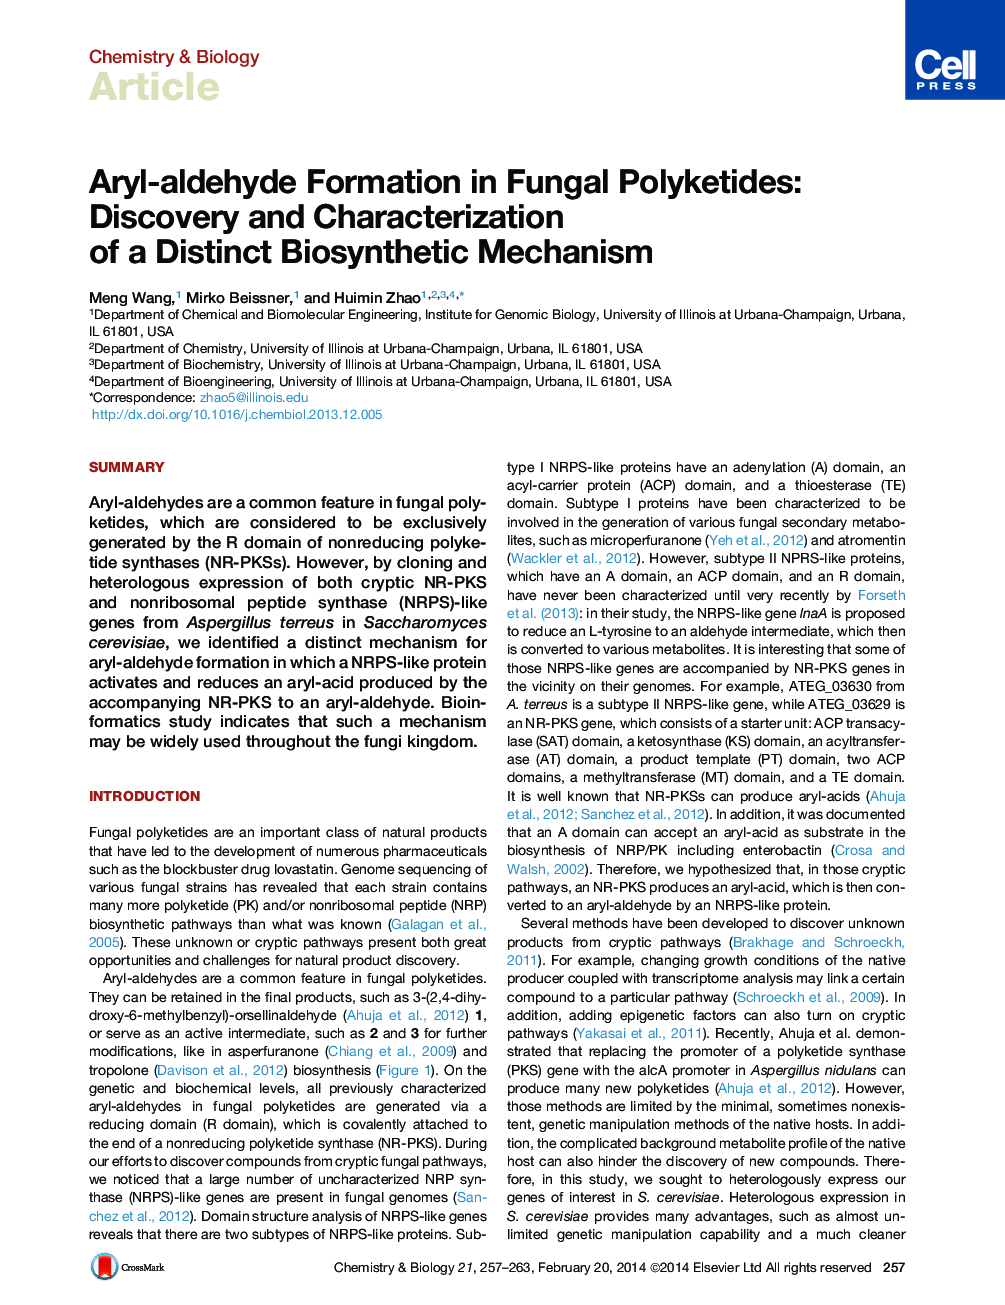 Aryl-aldehyde Formation in Fungal Polyketides: Discovery and Characterization of a Distinct Biosynthetic Mechanism